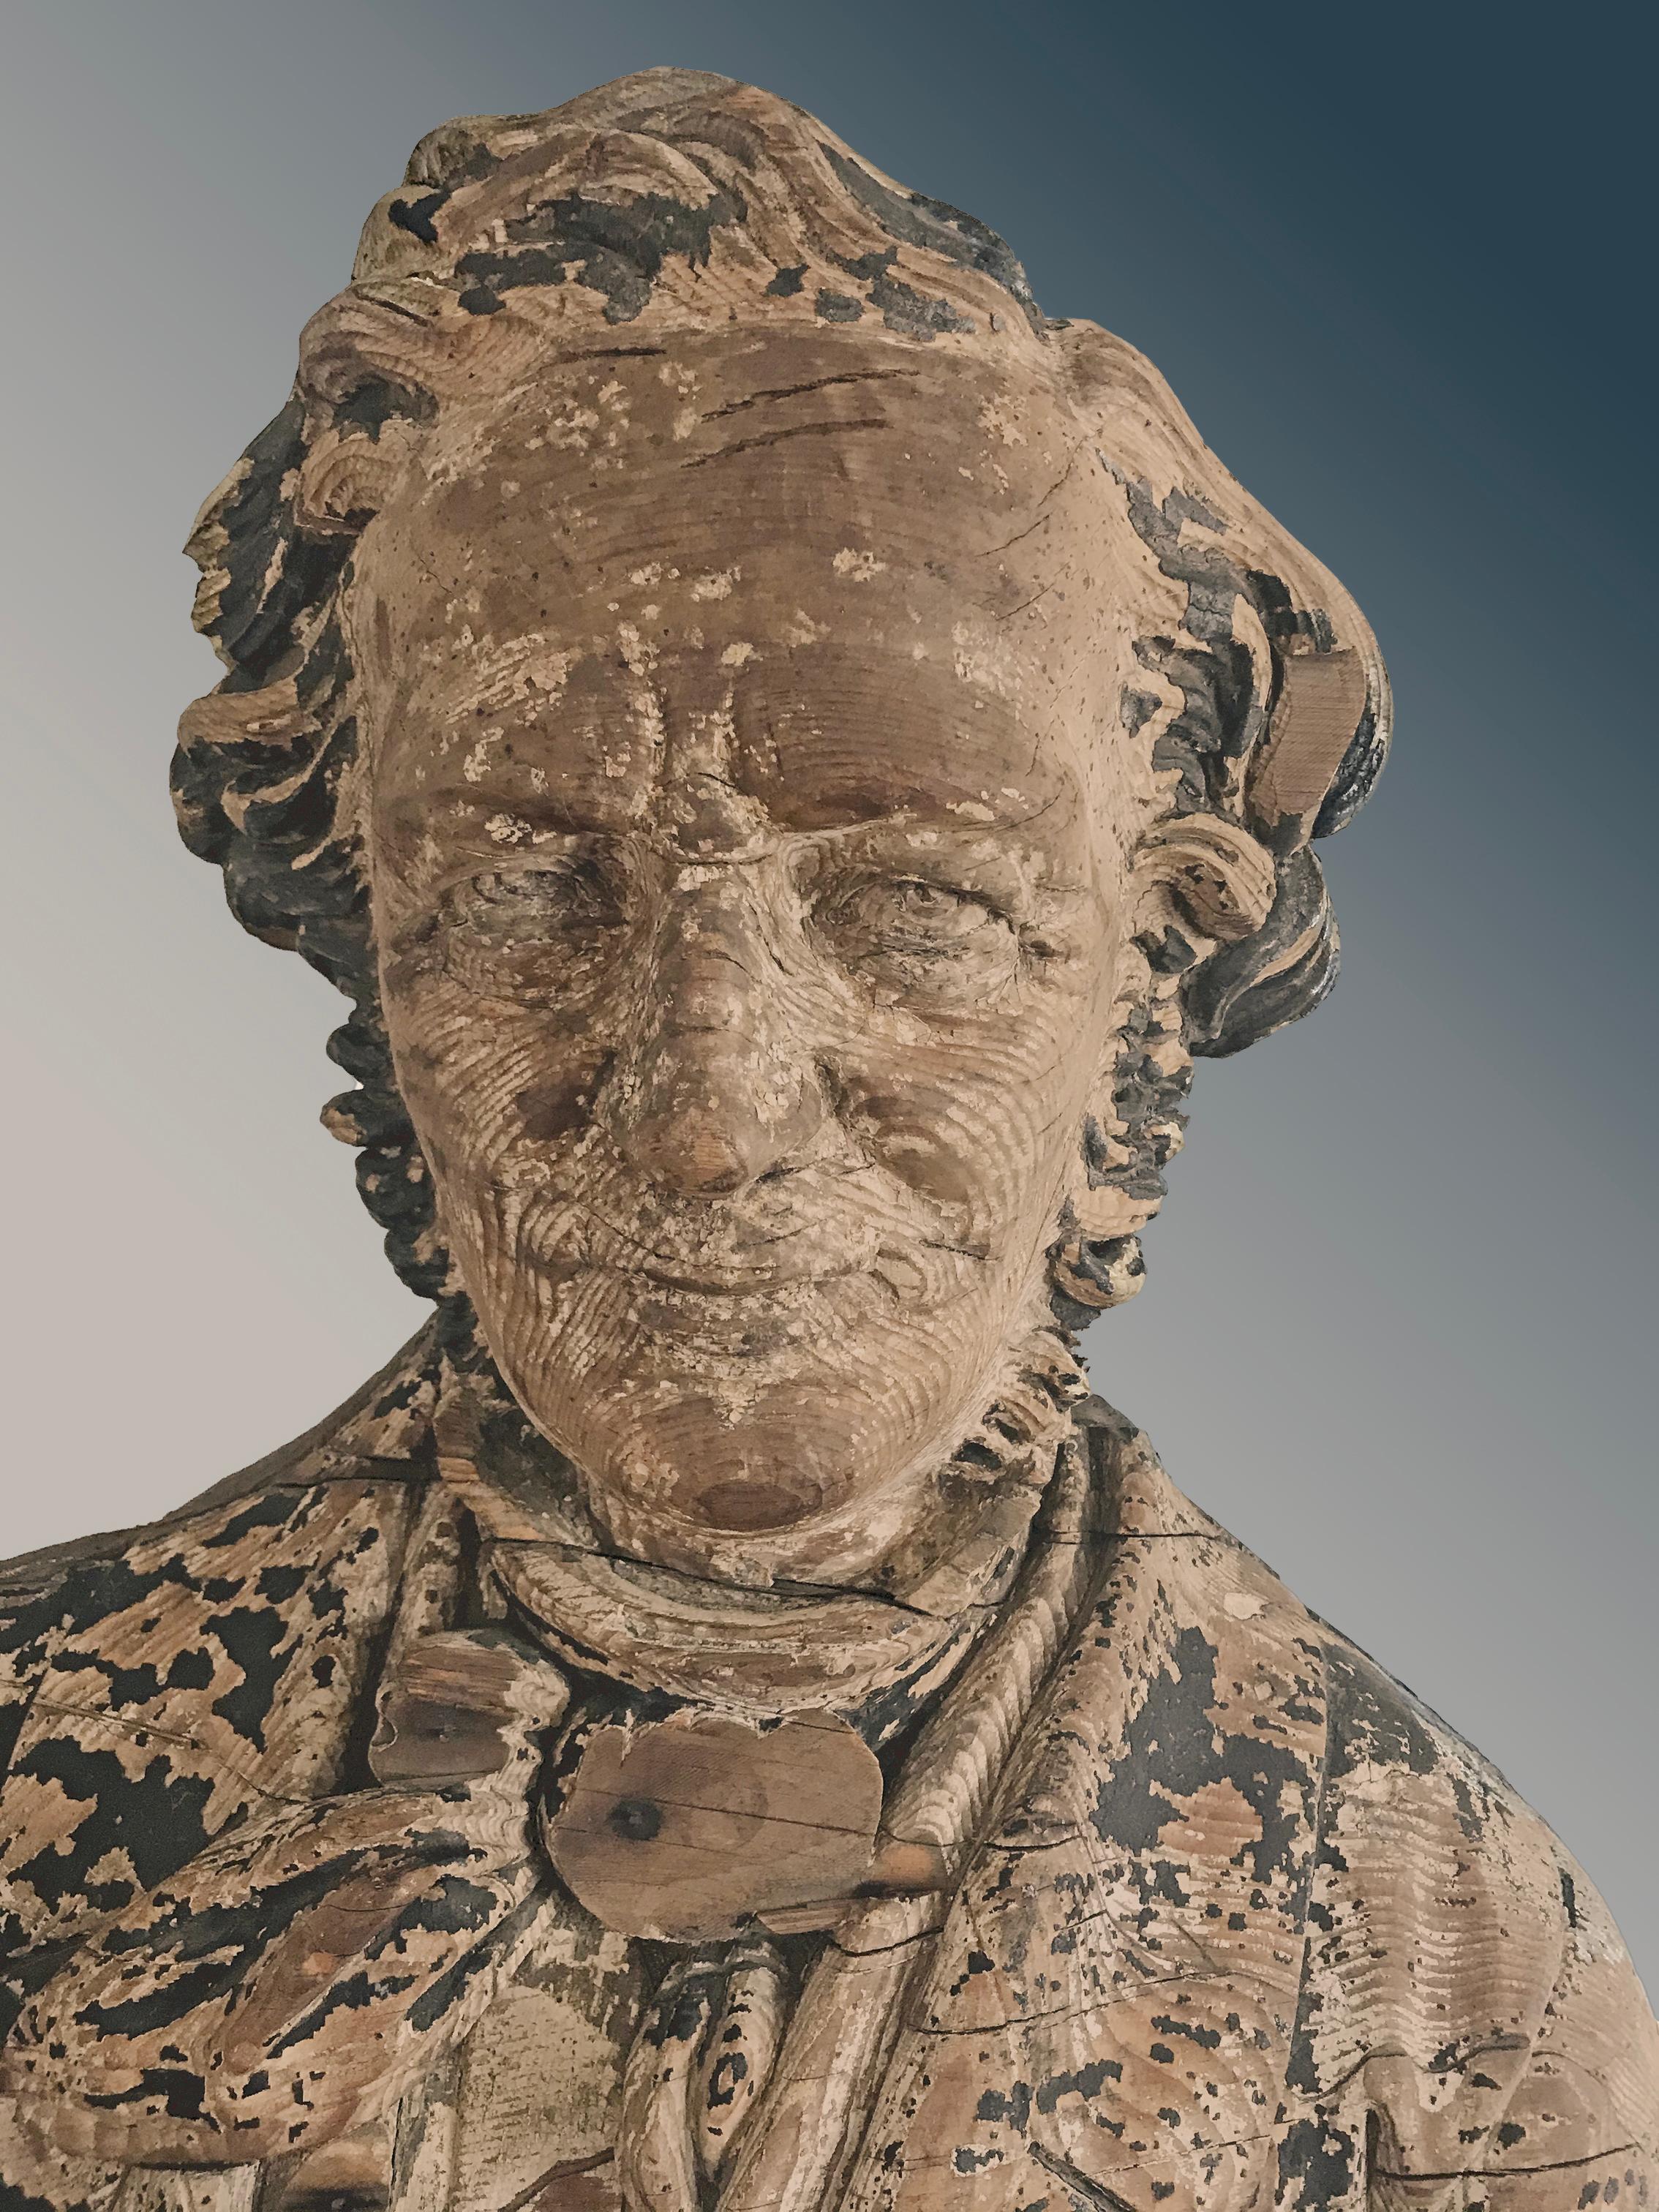 Sternboard carving of a bust, carved in the round, wearing a blue-painted jacket and black tie, with an undershirt. Decorated sternboard carvings were a rarely used counterpart of figureheads, usually they were eagles or some type of decorative